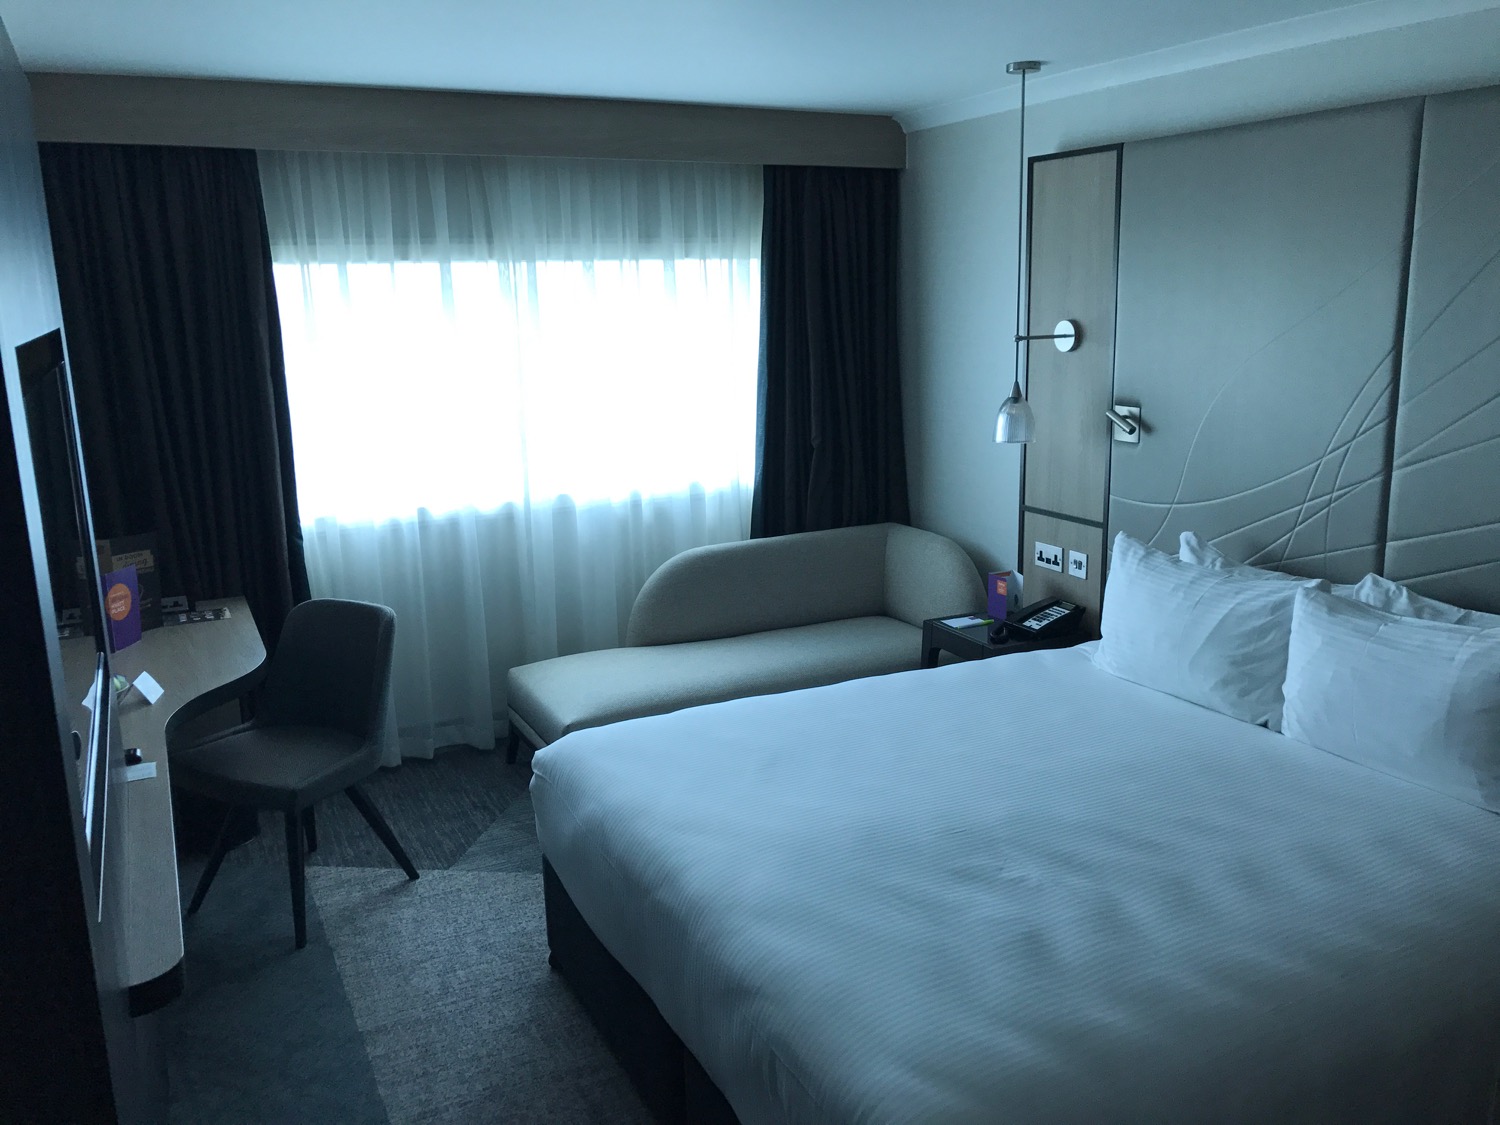 Review: the Hyatt Place London Heathrow Airport hotel